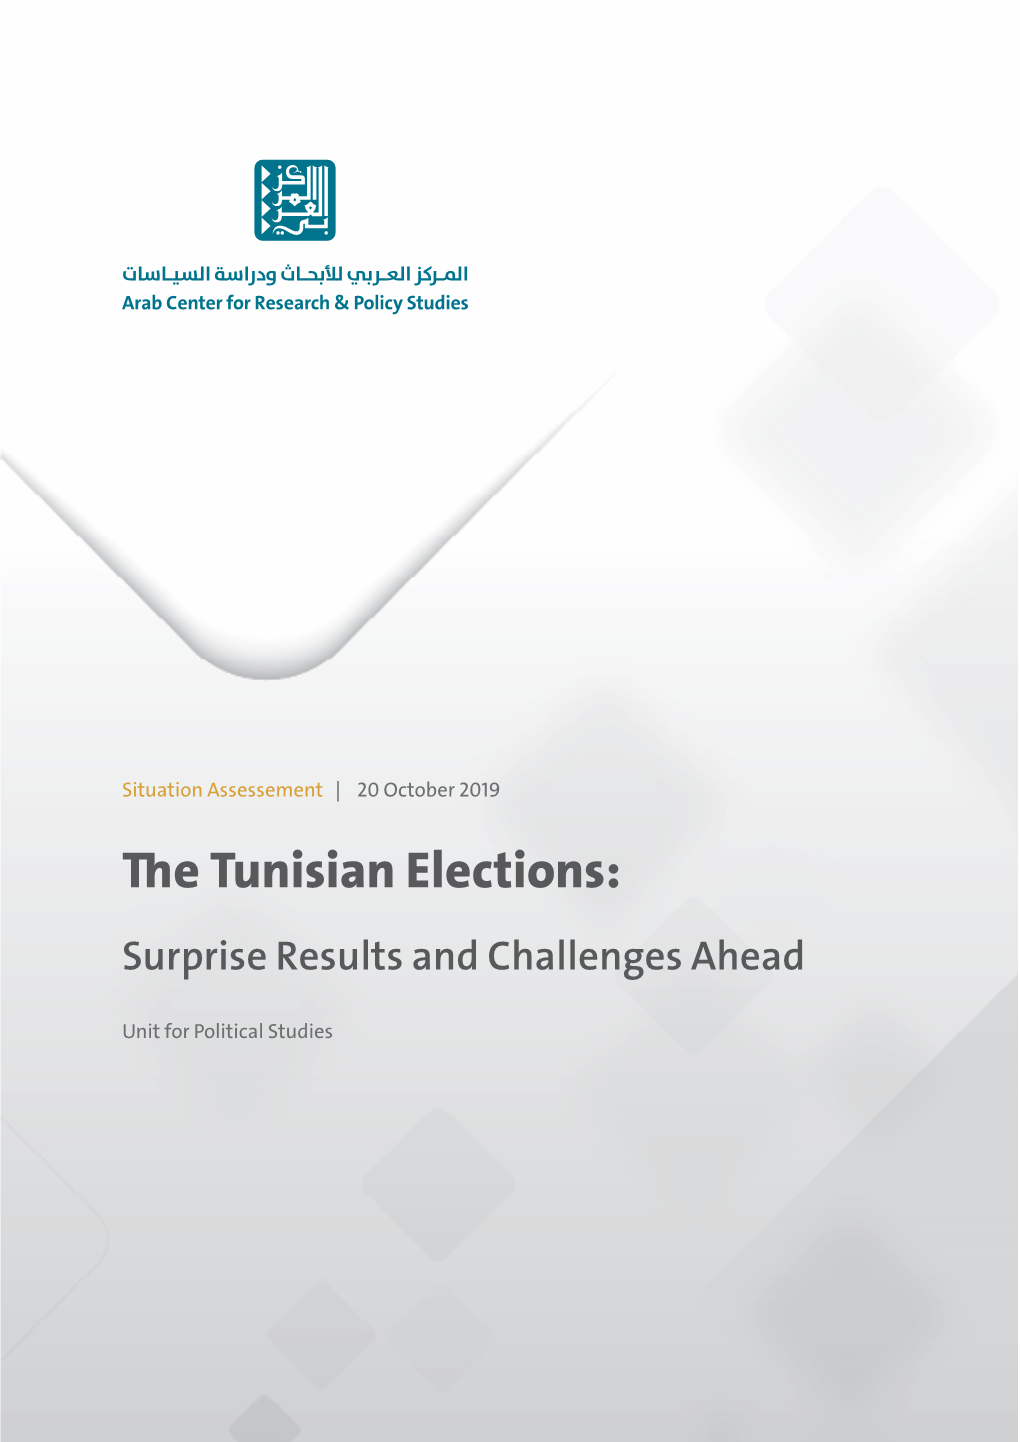 The Tunisian Elections: Surprise Results and Challenges Ahead